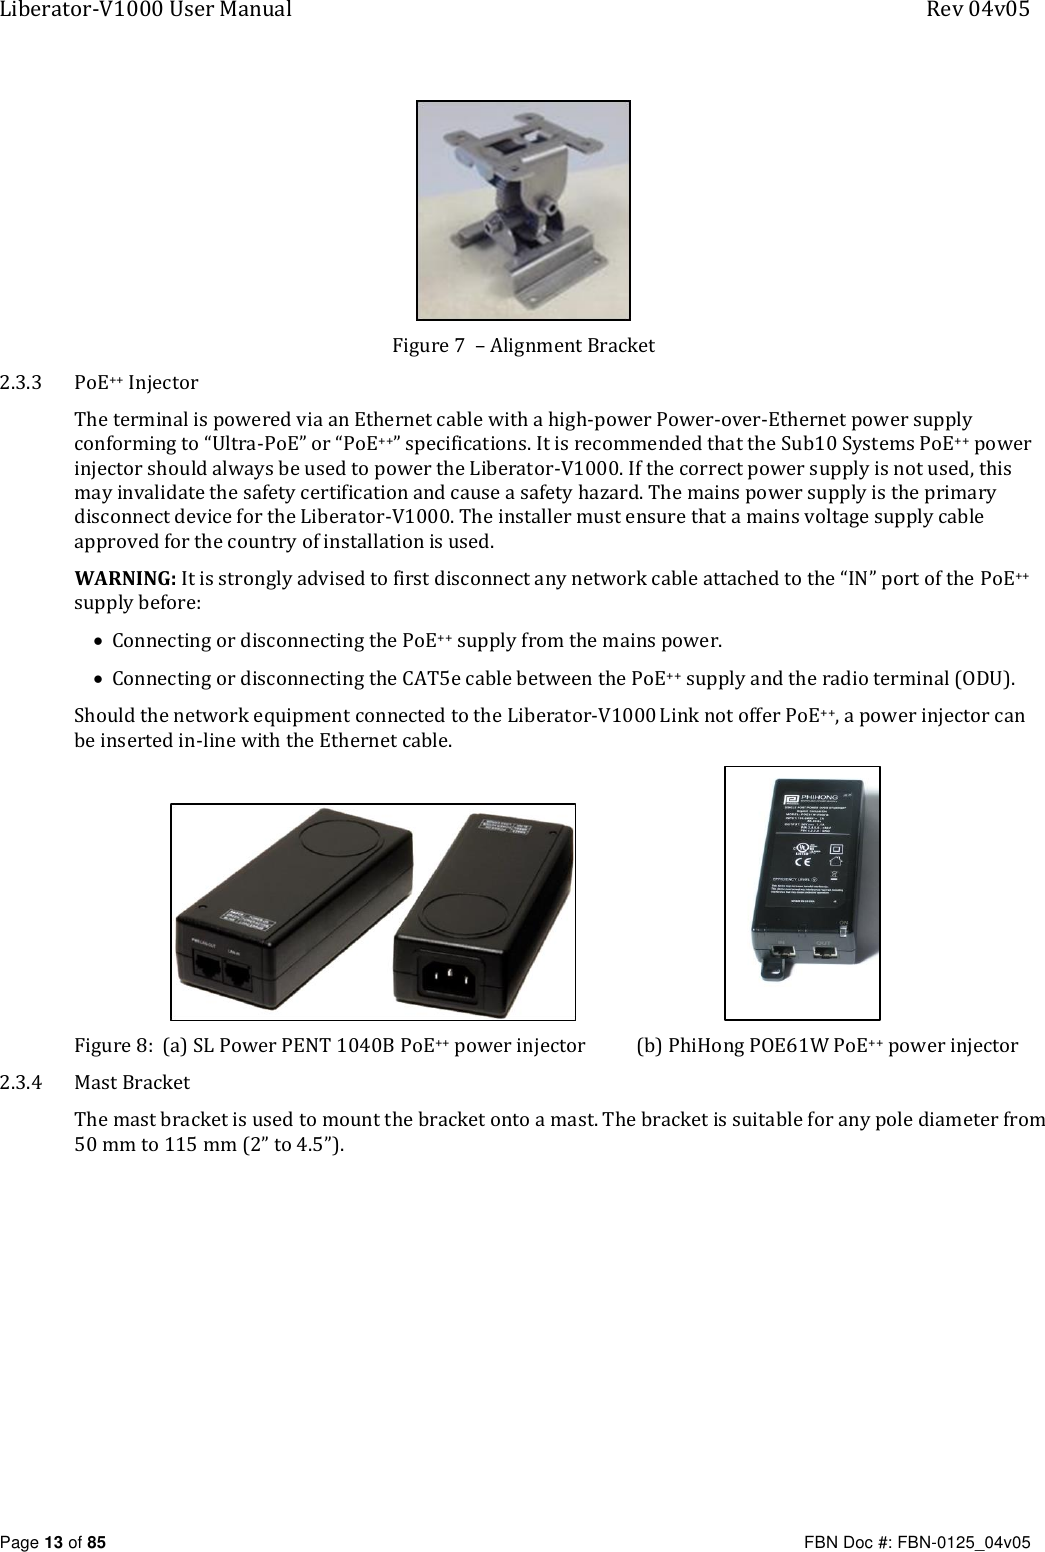 Liberator-V1000 User Manual  Rev 04v05     Page 13 of 85   FBN Doc #: FBN-0125_04v05  Figure 7  – Alignment Bracket 2.3.3 PoE++ Injector The terminal is powered via an Ethernet cable with a high-power Power-over-Ethernet power supply conforming to “Ultra-PoE” or “PoE++” specifications. It is recommended that the Sub10 Systems PoE++ power injector should always be used to power the Liberator-V1000. If the correct power supply is not used, this may invalidate the safety certification and cause a safety hazard. The mains power supply is the primary disconnect device for the Liberator-V1000. The installer must ensure that a mains voltage supply cable approved for the country of installation is used. WARNING: It is strongly advised to first disconnect any network cable attached to the “IN” port of the PoE++ supply before:   Connecting or disconnecting the PoE++ supply from the mains power.  Connecting or disconnecting the CAT5e cable between the PoE++ supply and the radio terminal (ODU). Should the network equipment connected to the Liberator-V1000 Link not offer PoE++, a power injector can be inserted in-line with the Ethernet cable.                                                          Figure 8:  (a) SL Power PENT 1040B PoE++ power injector           (b) PhiHong POE61W PoE++ power injector 2.3.4 Mast Bracket The mast bracket is used to mount the bracket onto a mast. The bracket is suitable for any pole diameter from 50 mm to 115 mm (2” to 4.5”). 